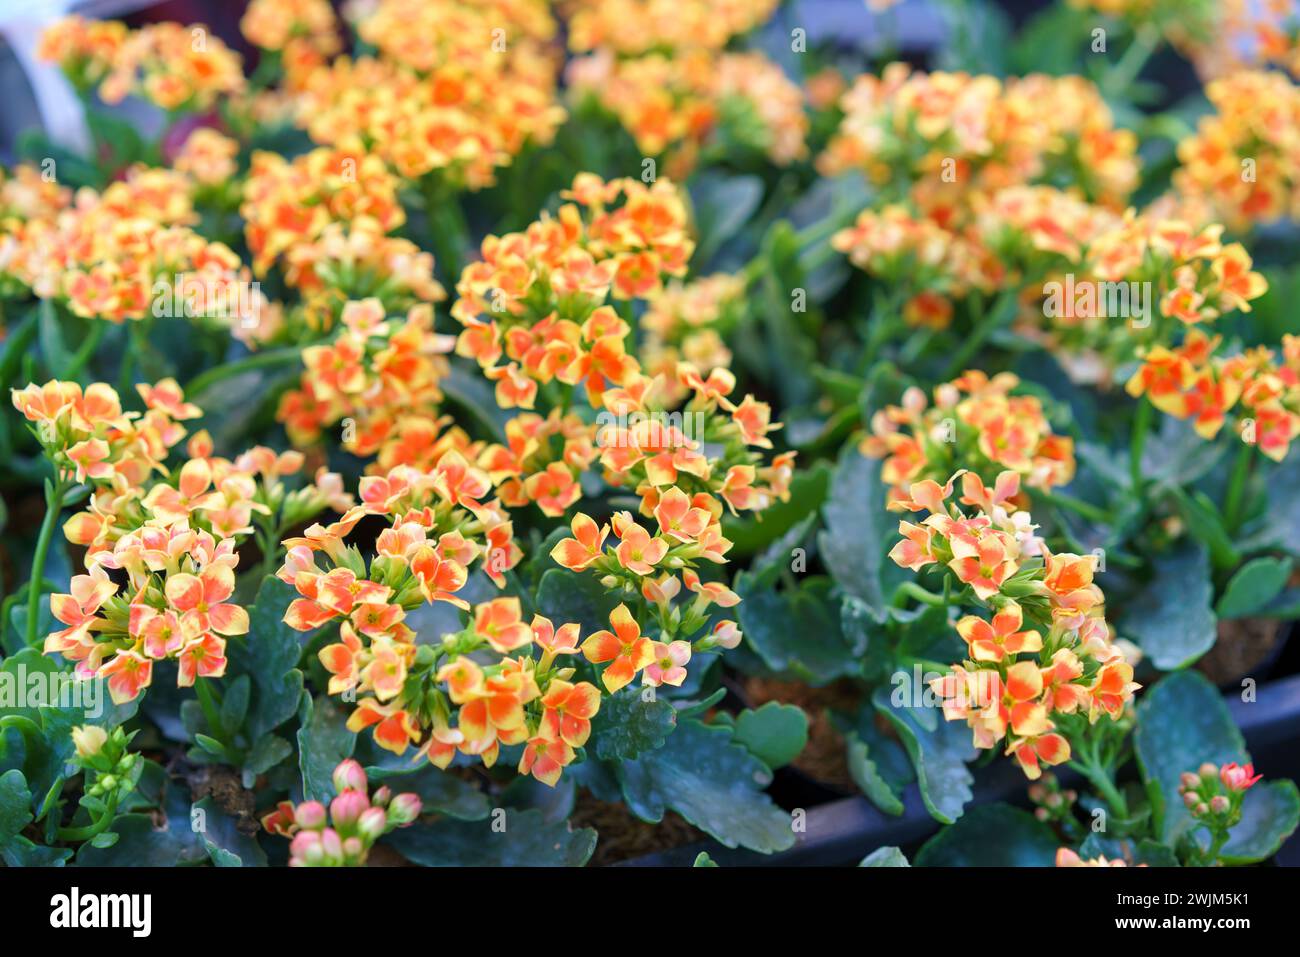 A vibrant display of blooming Kalanchoe plants, showcasing a burst of orange and yellow flowers against lush green leaves Stock Photo